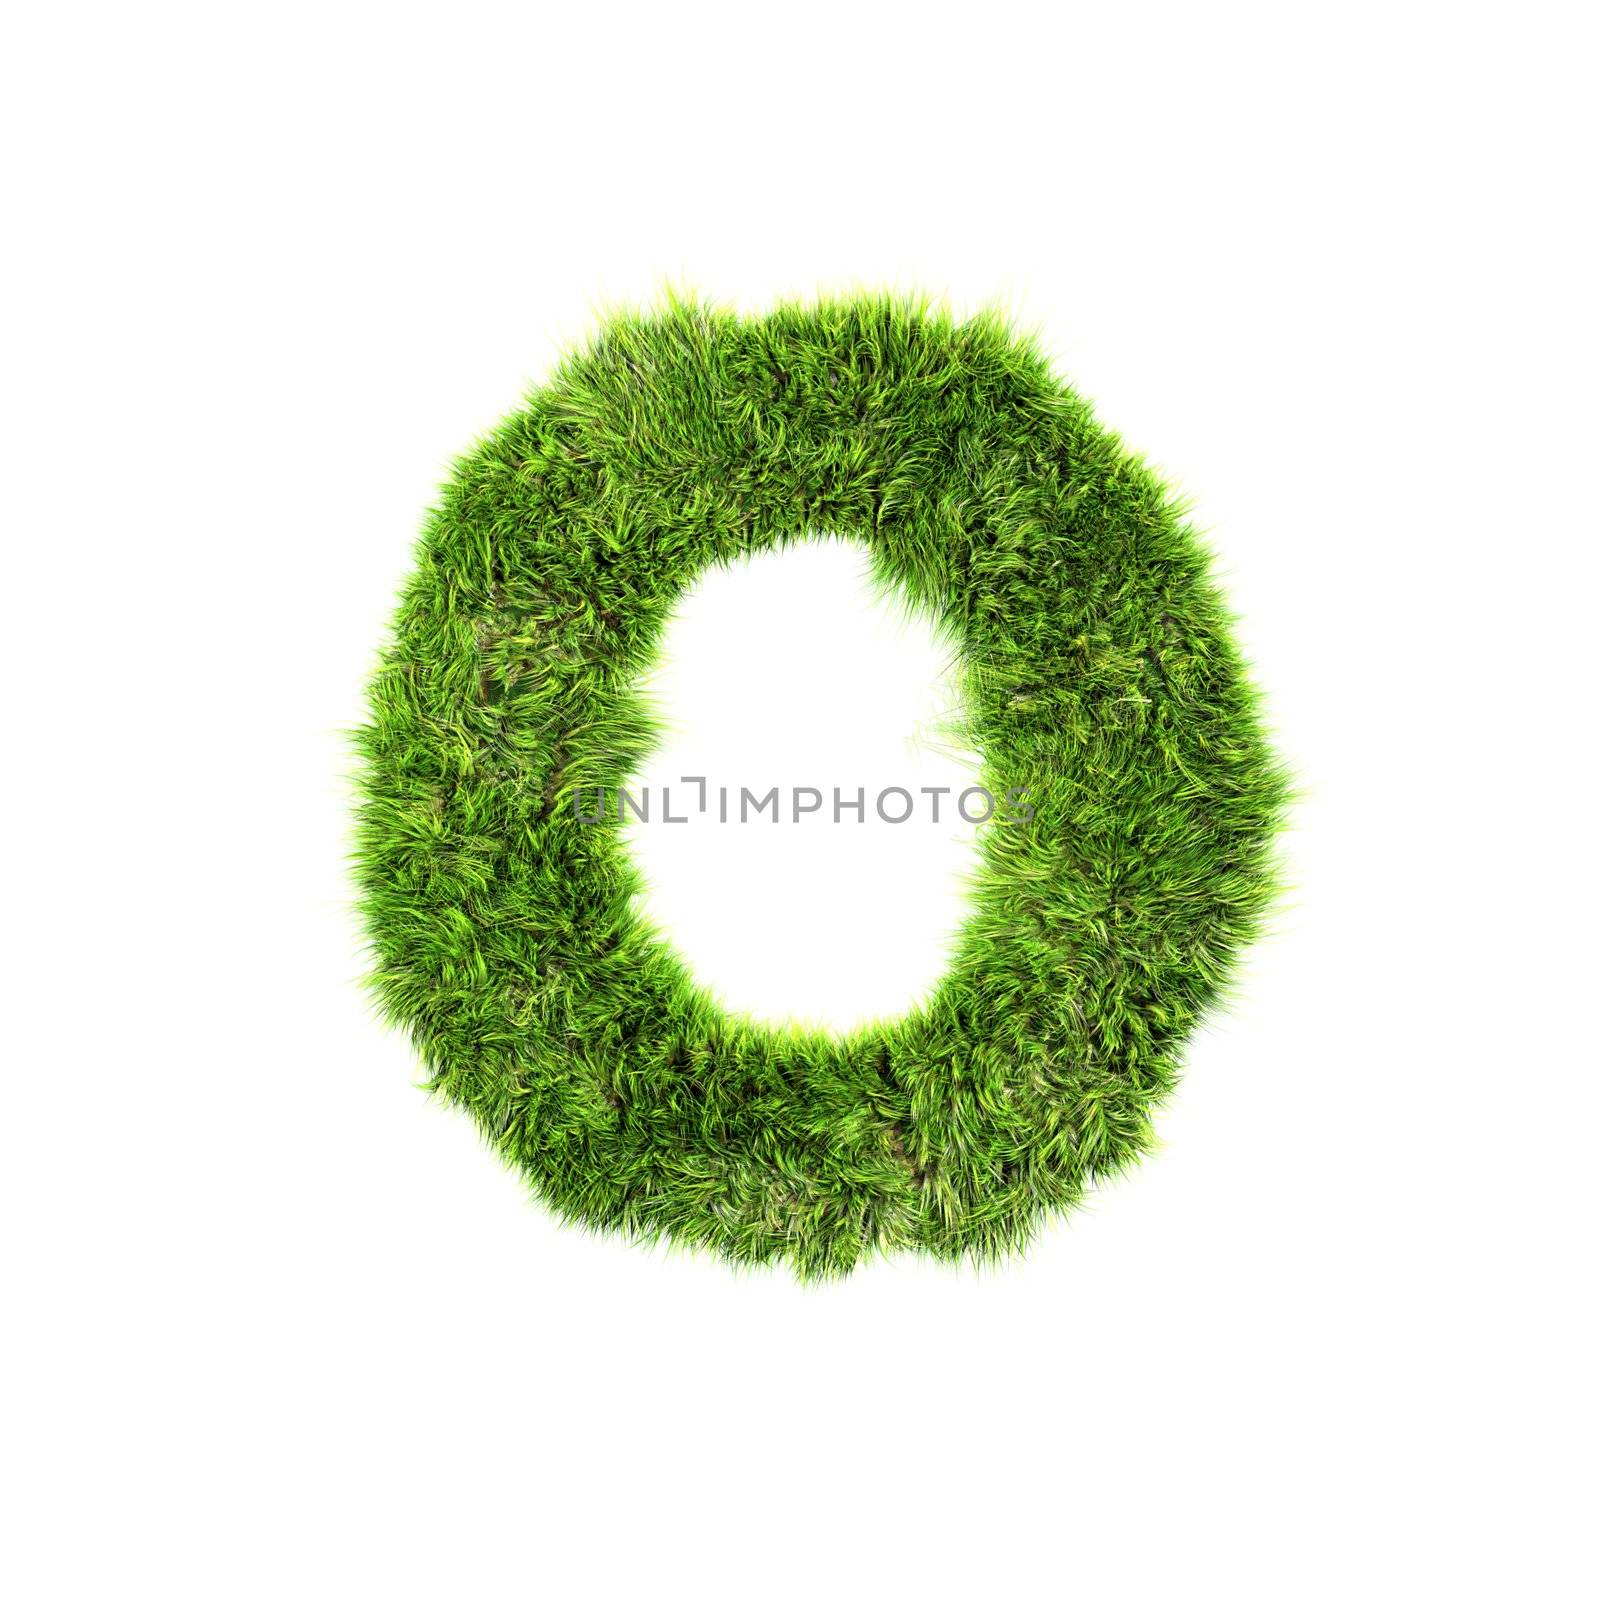 3d grass letter isolated on white background - O by chrisroll